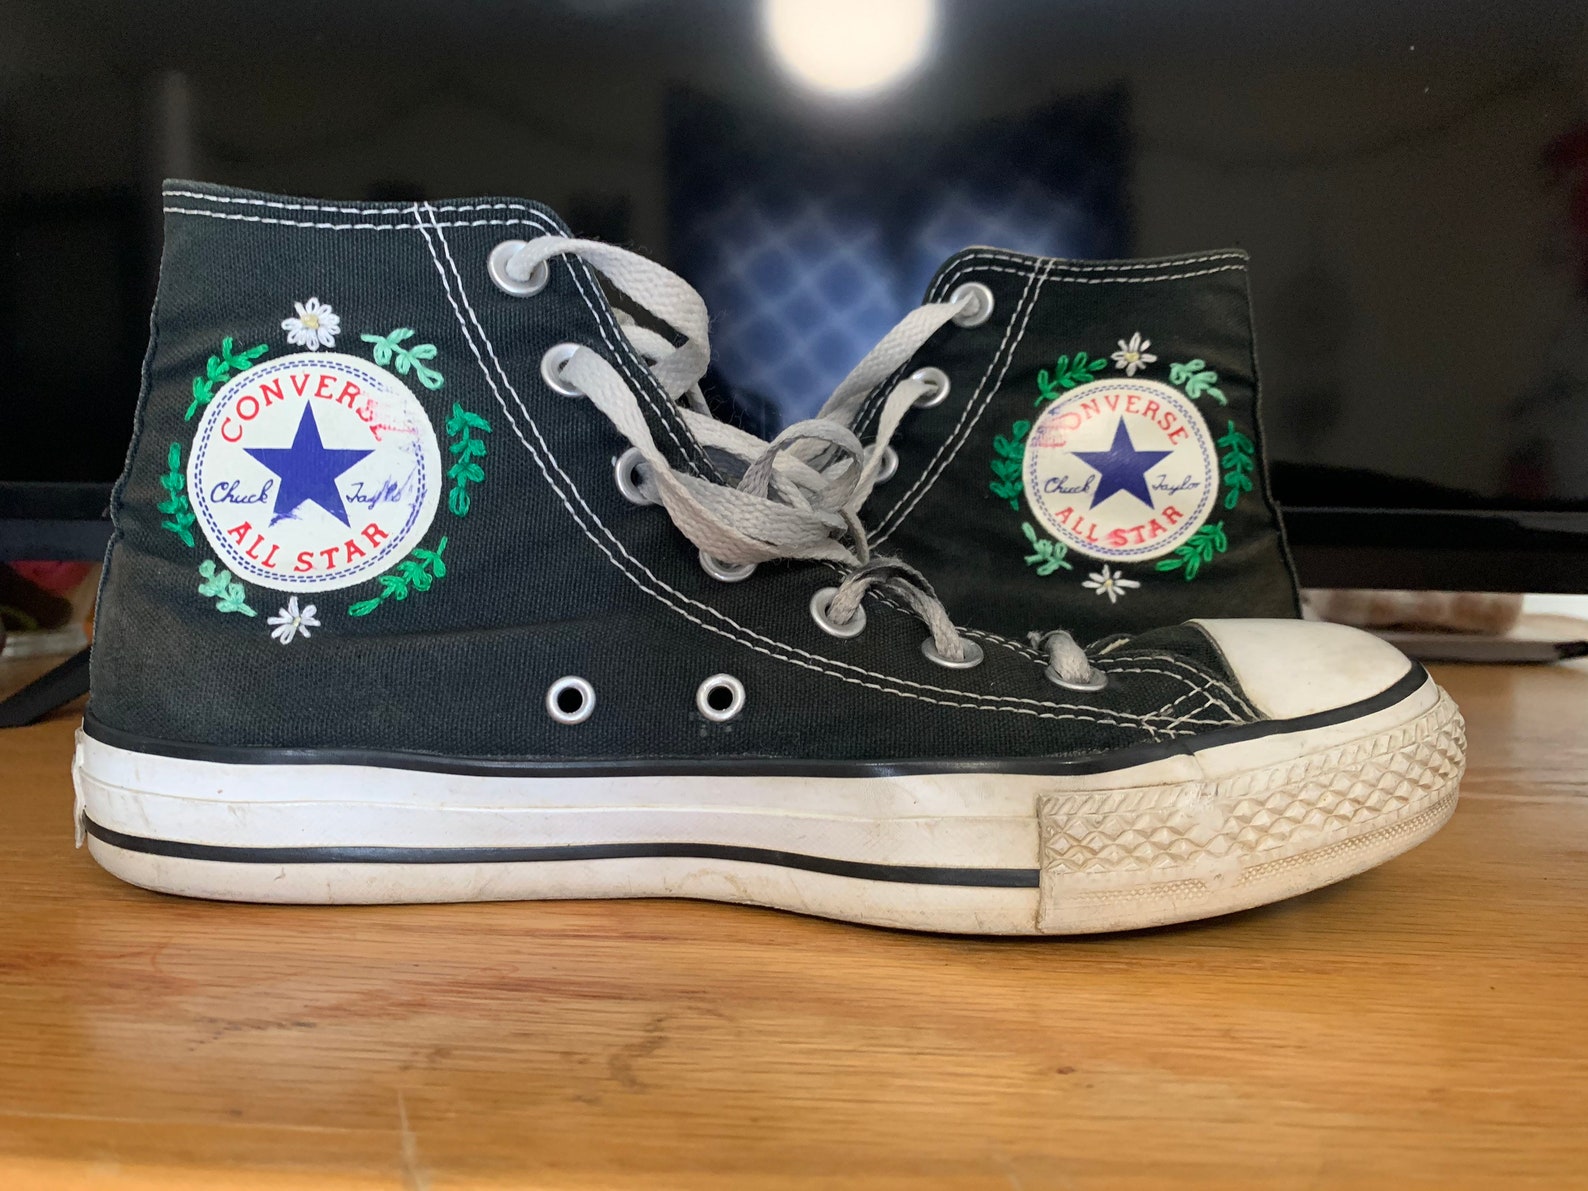 Hand embroidered converse high tops converse included comes | Etsy